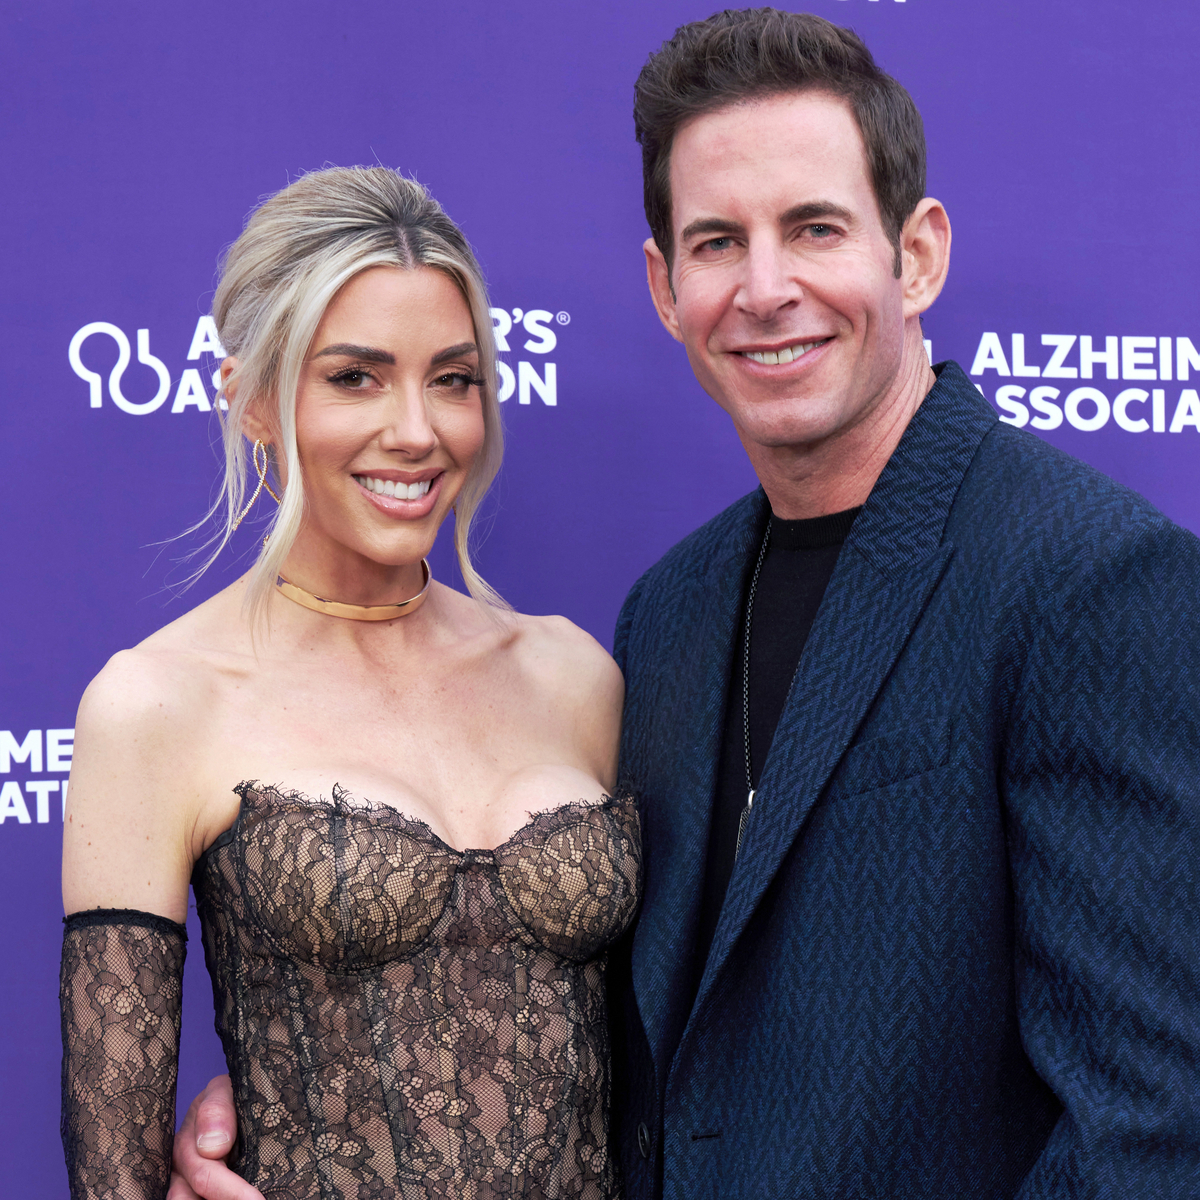 Tarek El Moussa Claps Back at Criticism Over Video With Wife Heather